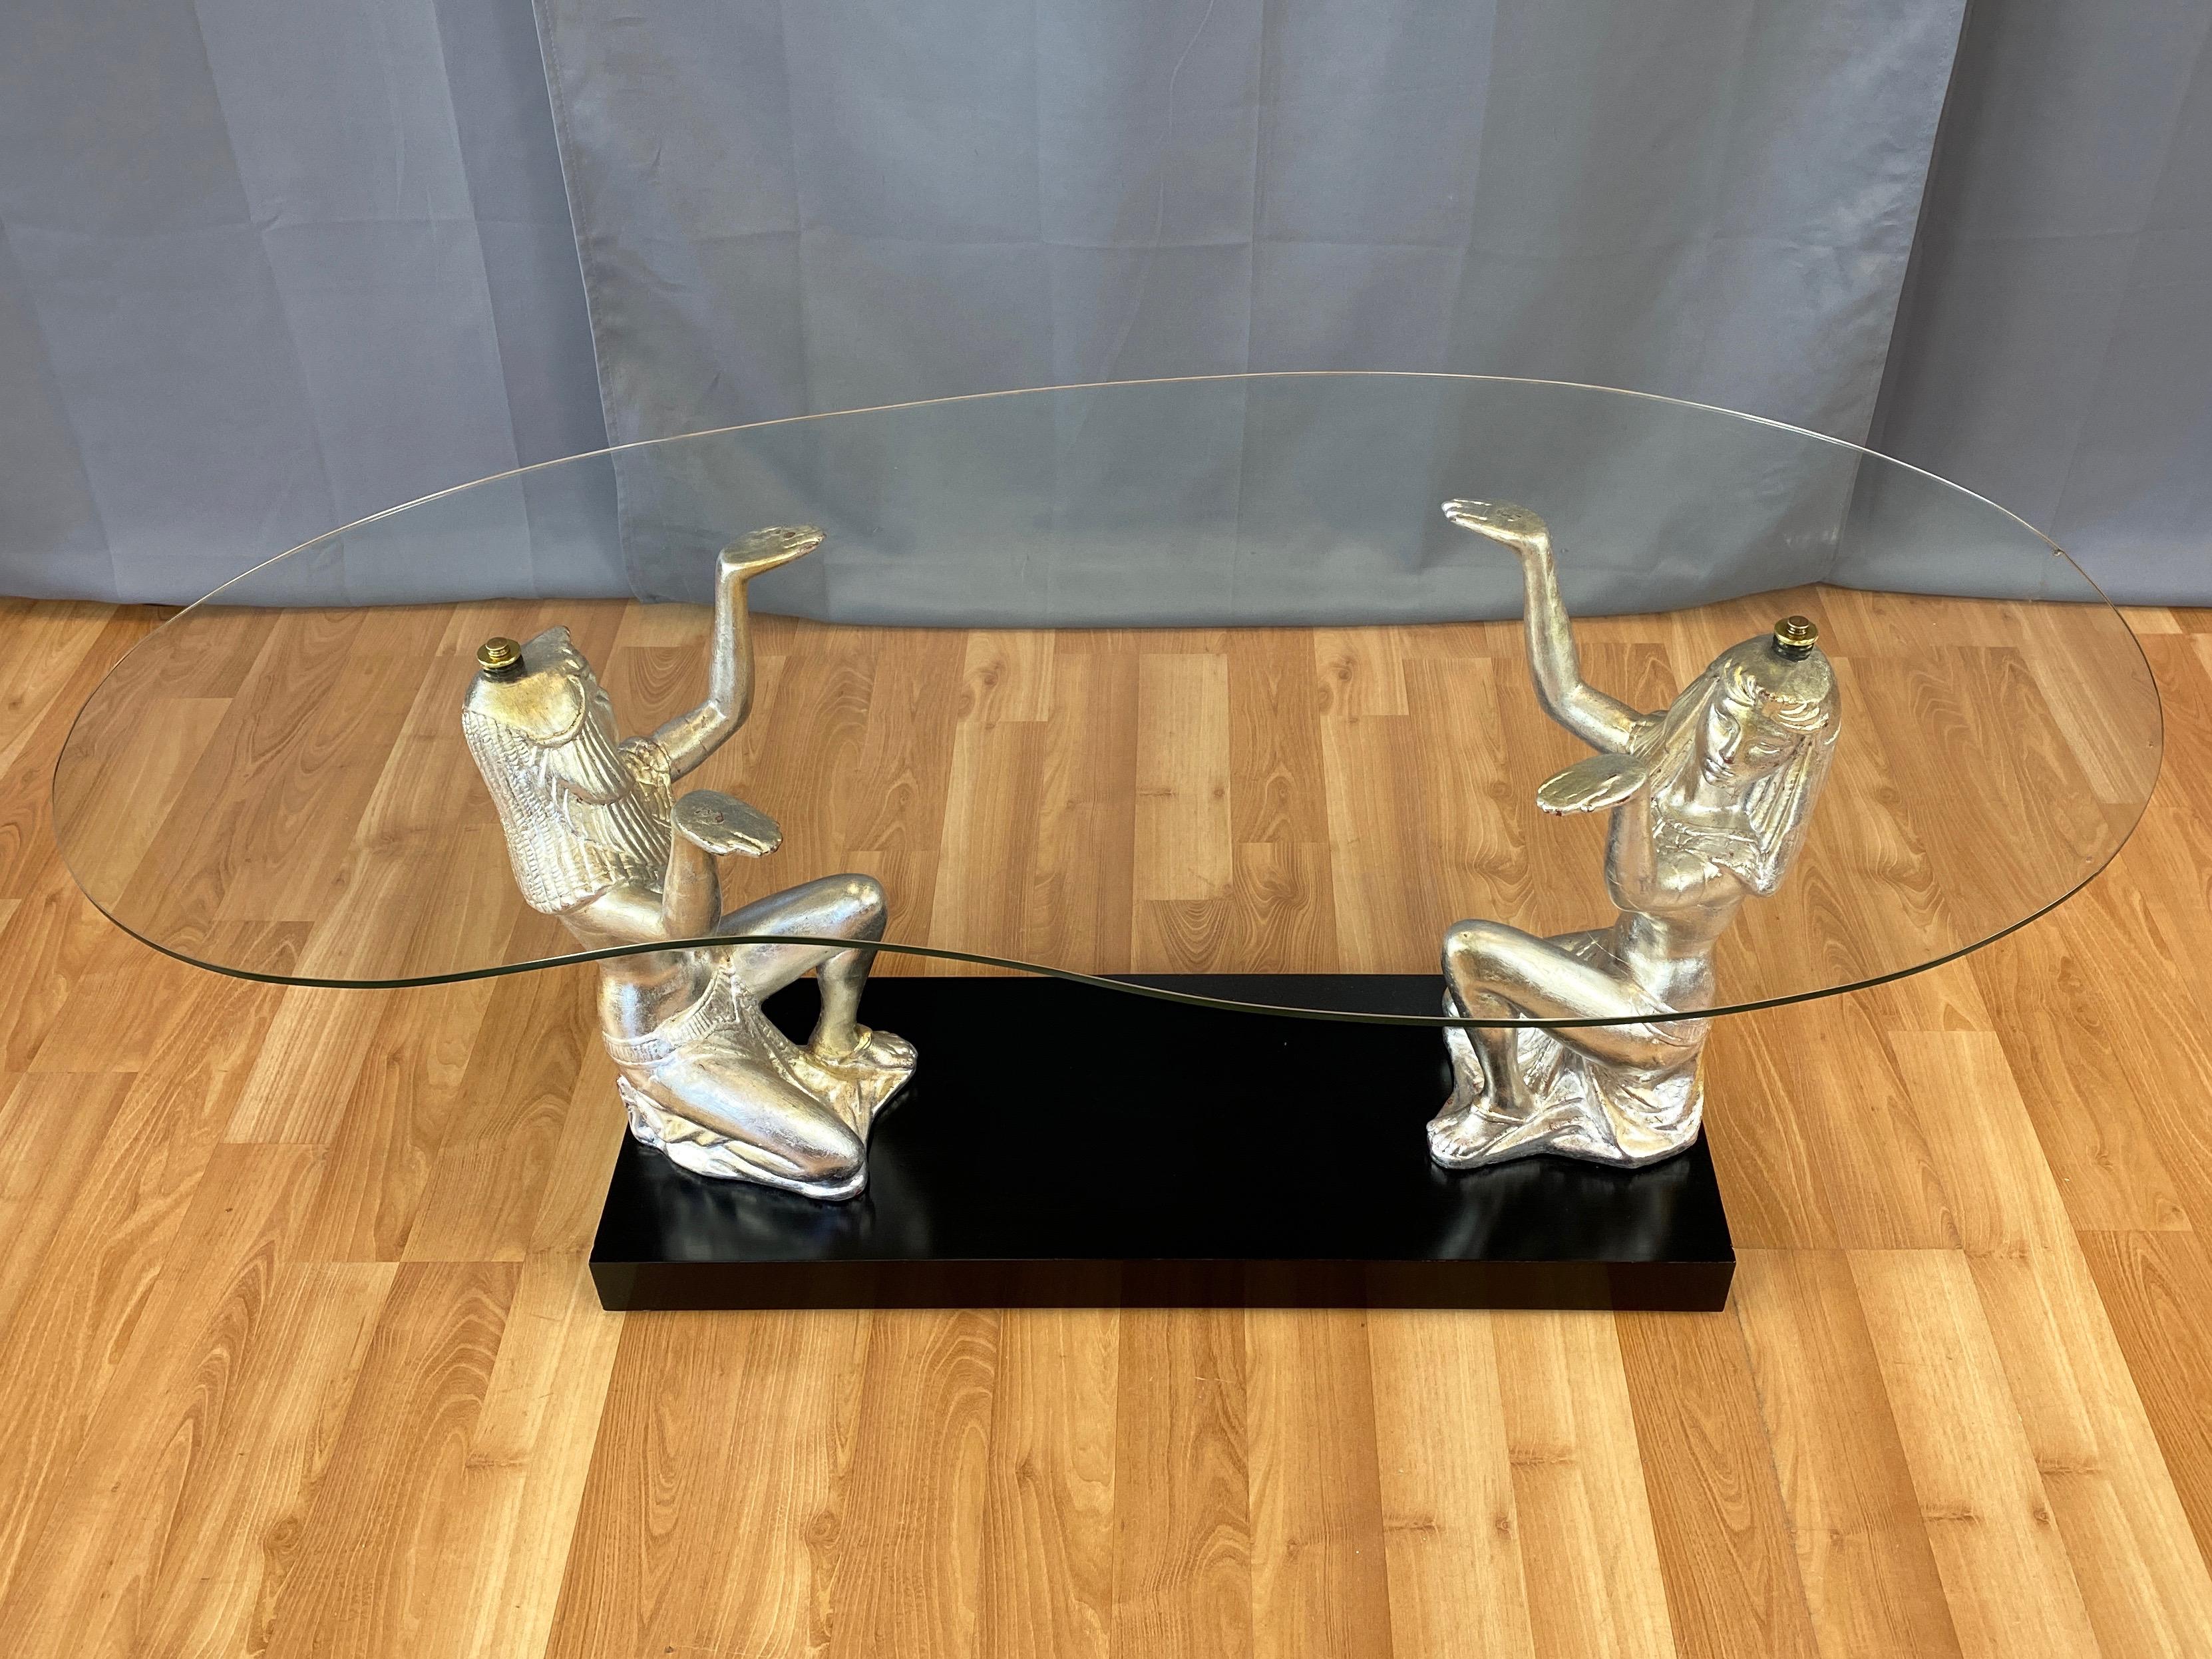 California Lamps & Shades Co. Silvered Egyptian Figures Glass Coffee Table, 1951 For Sale 6